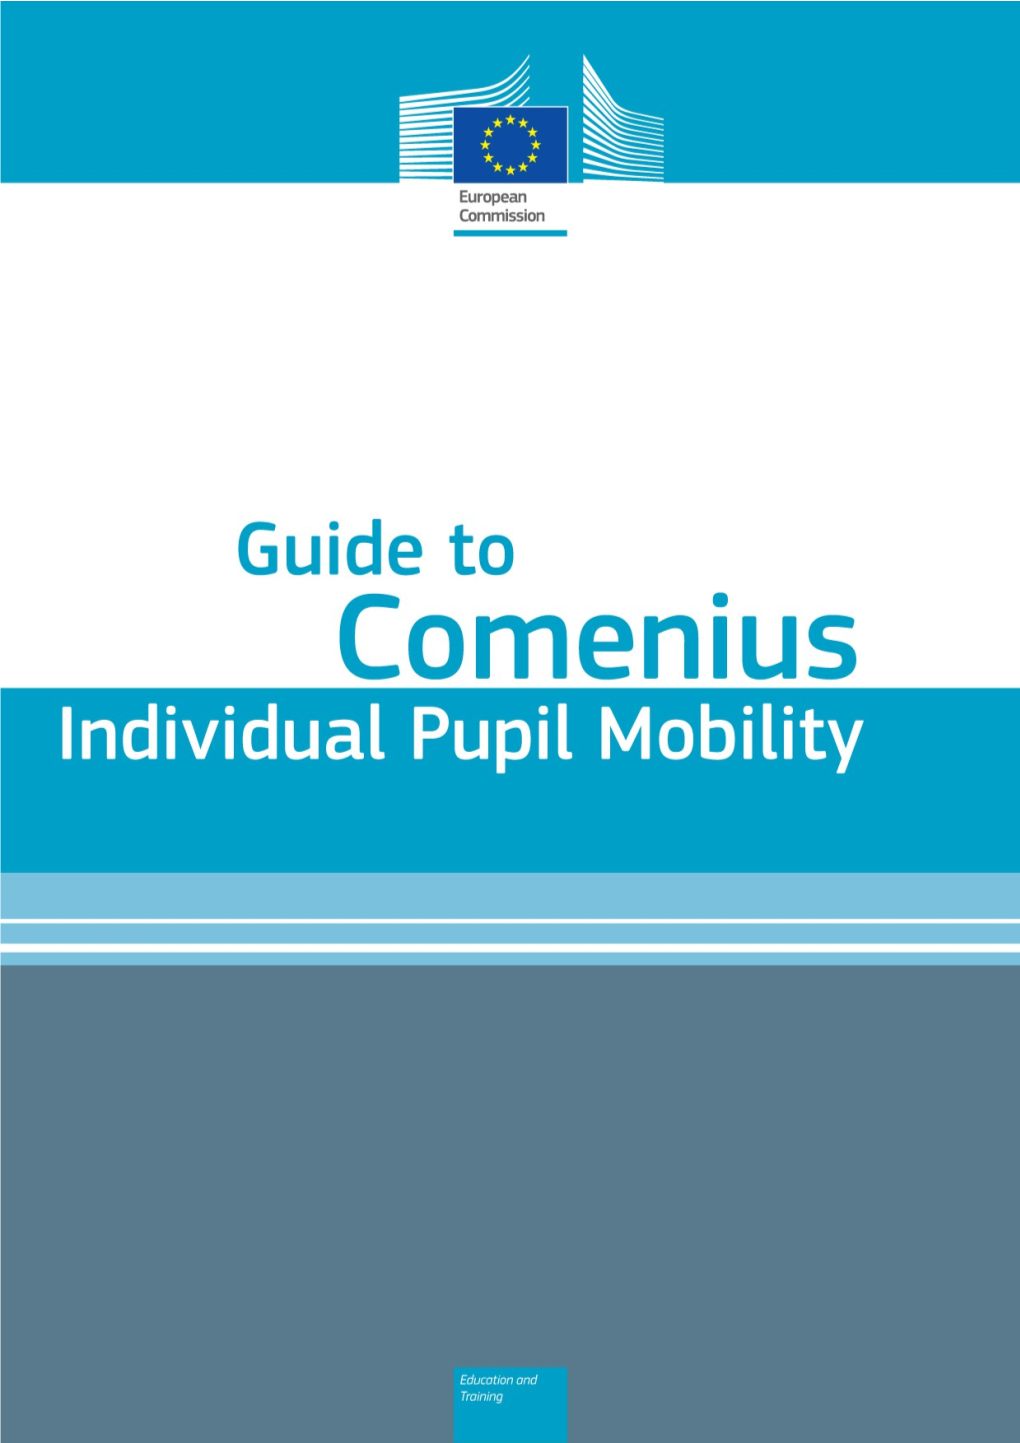 Guide to Comenius Individual Pupil Mobility